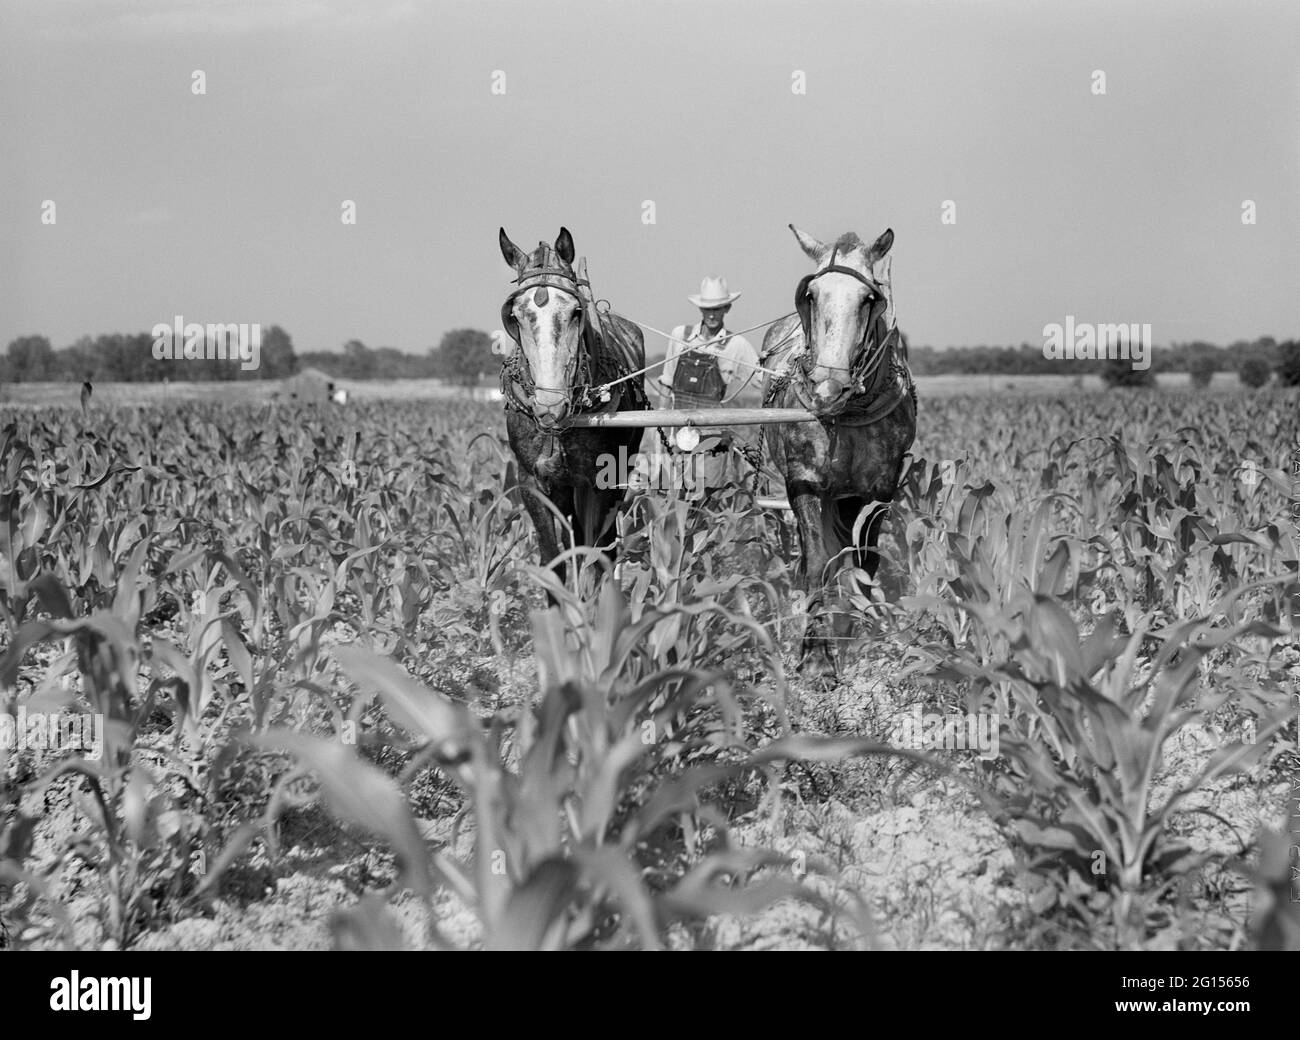 J.D. Anglin, cultivating his Corn with a pair of Mares, Transylvania Resettlement Project,  Transylvania, Louisiana, USA, Marion Post Wolcott, U.S. Farm Security Administration, June 1940 Stock Photo